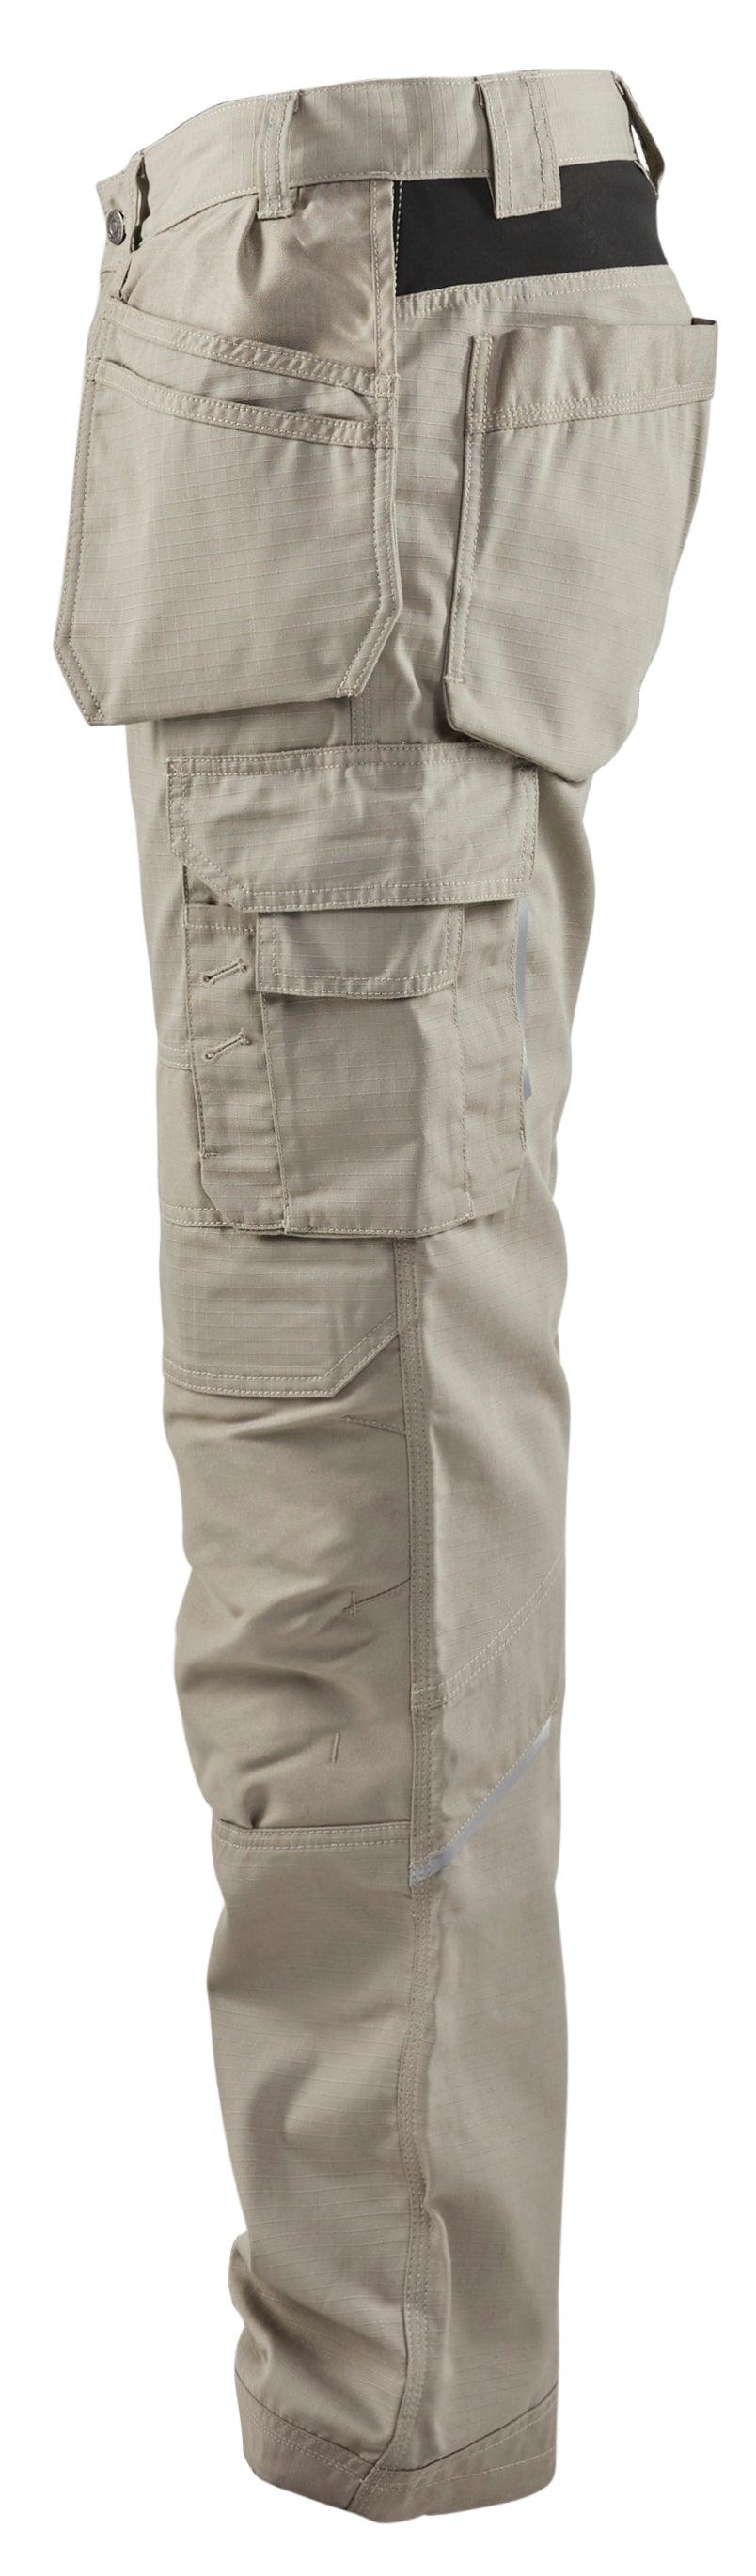 Blaklader 1691 7oz Rip Stop Pants with Stretch and Utility Pockets - Stone - Trusted Gear Company LLC